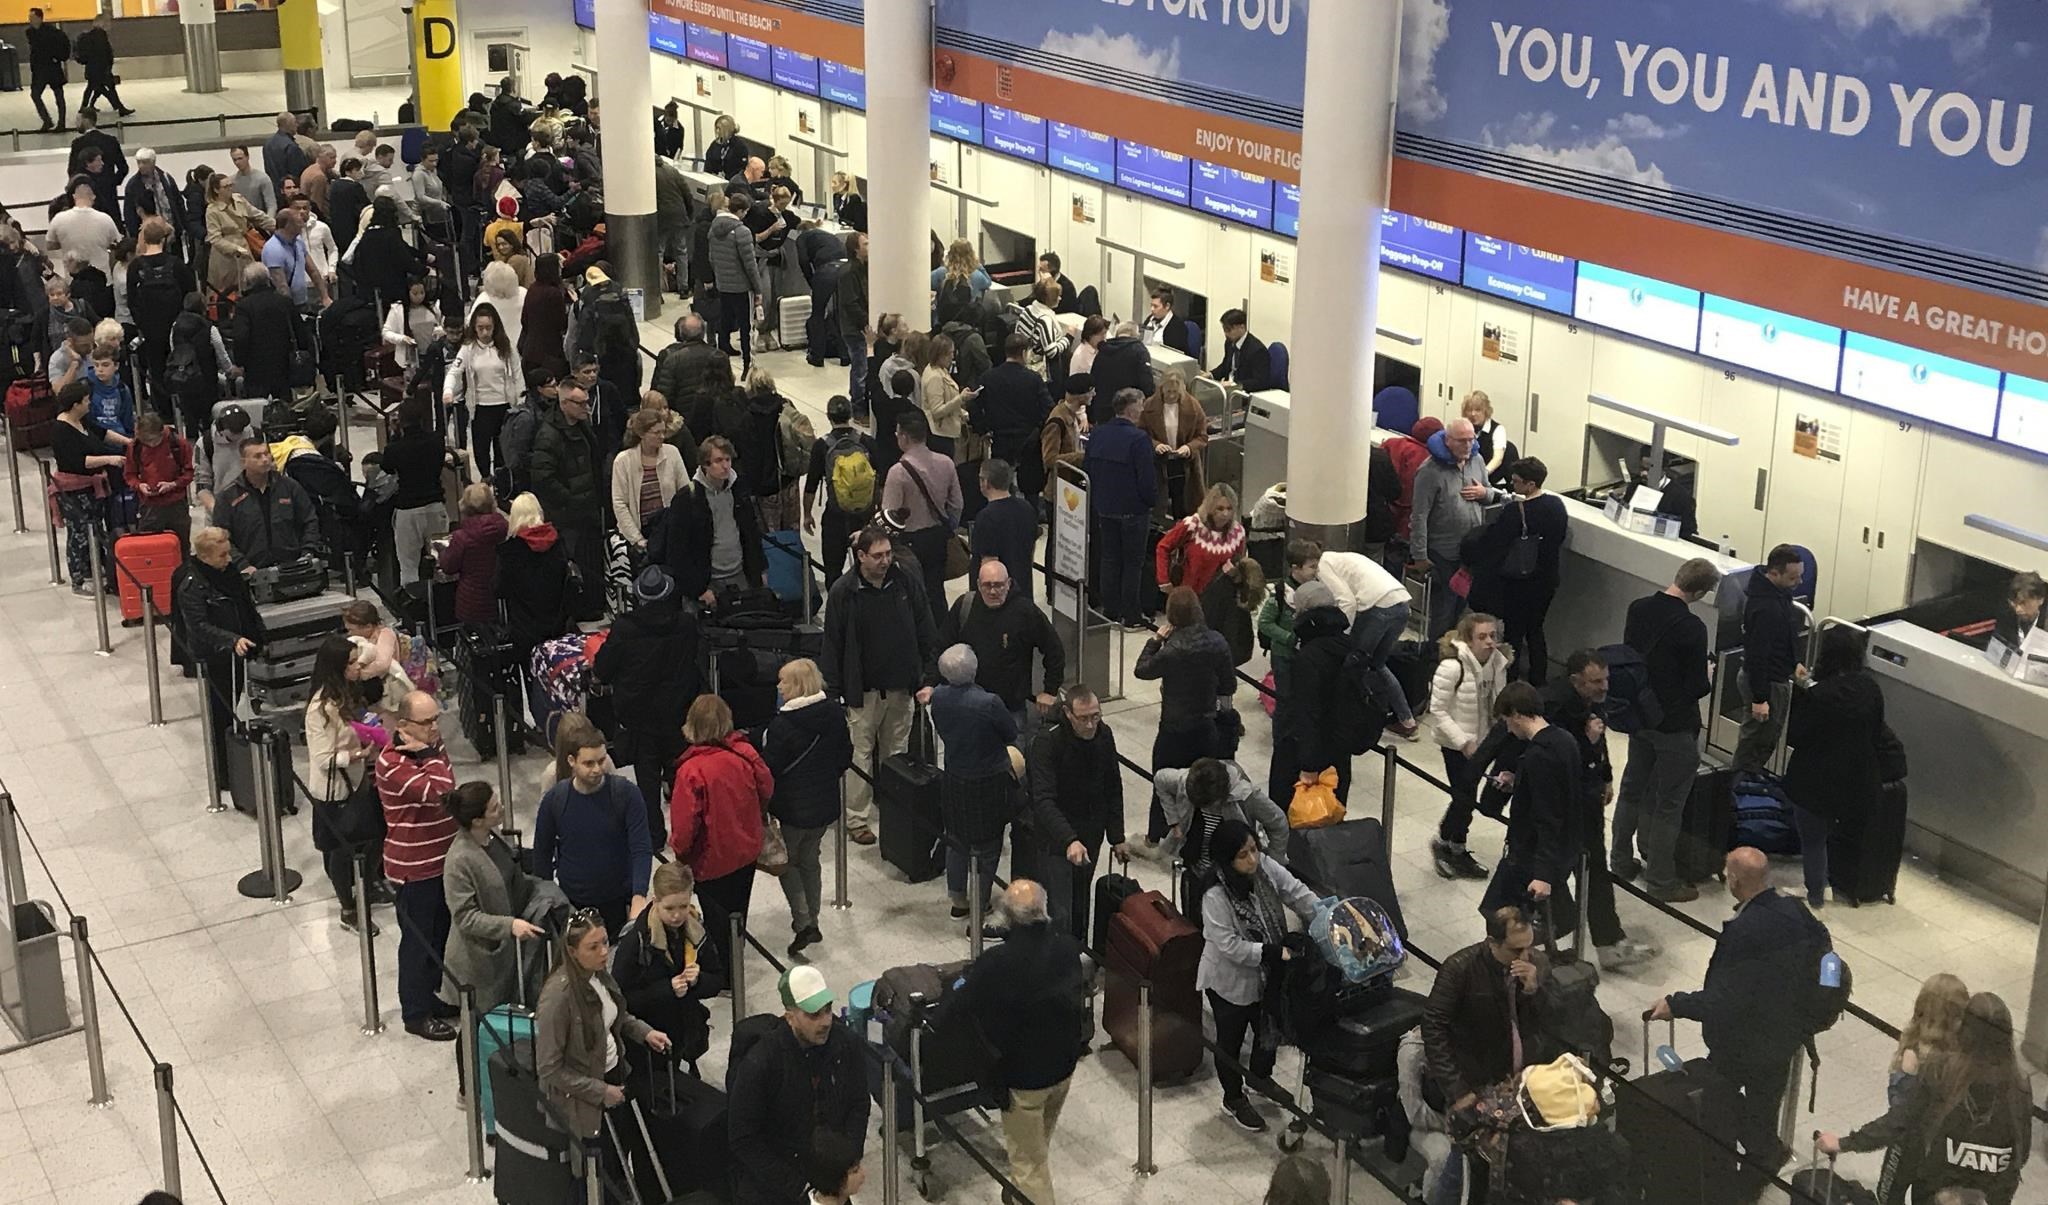 The technical: The UK’s e-passport system is stuck, and there’s serious congestion at the biggest airports